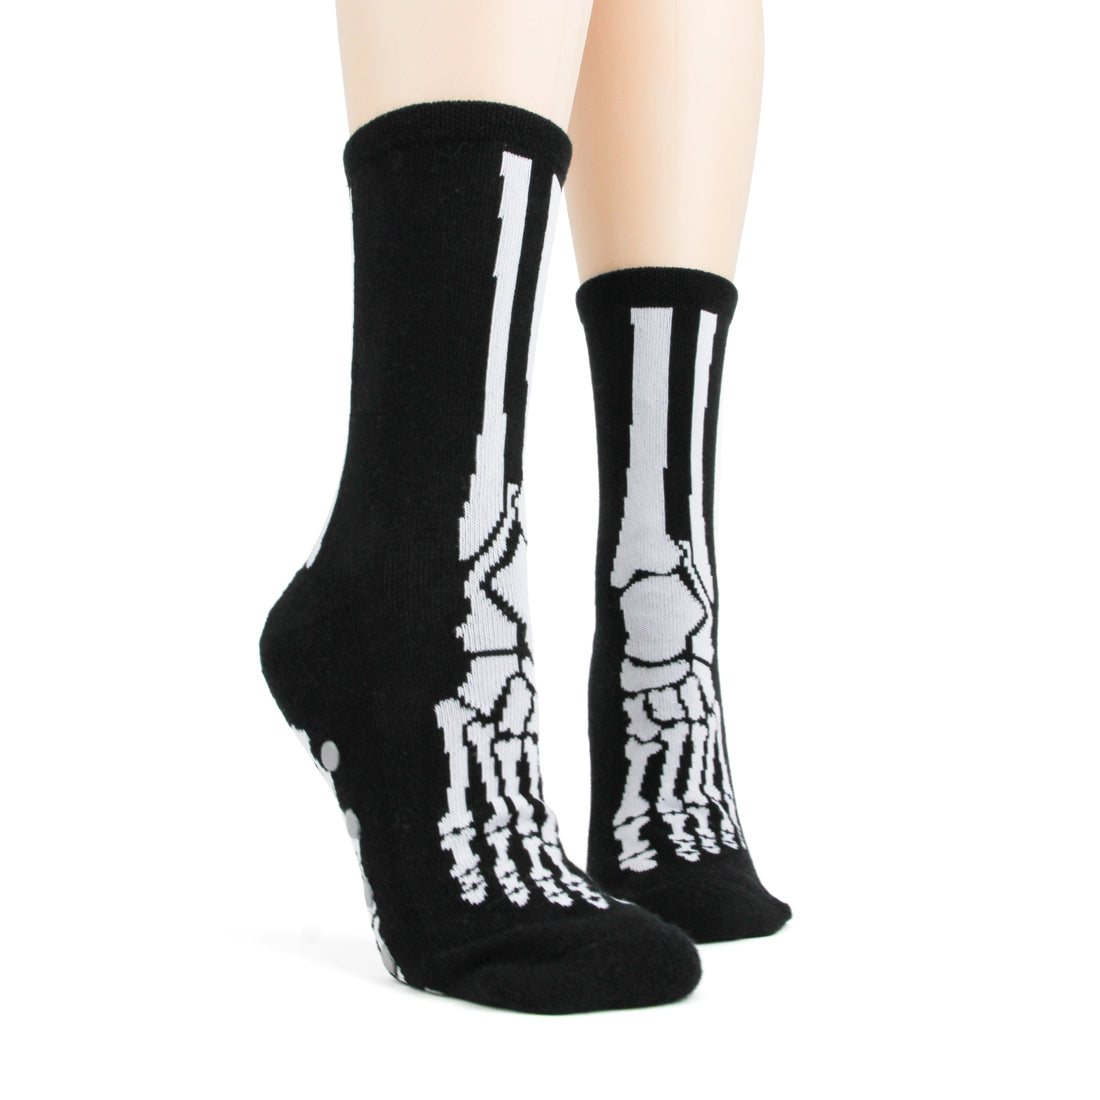 Slipper socks that show the bones of the foot like an x-ray